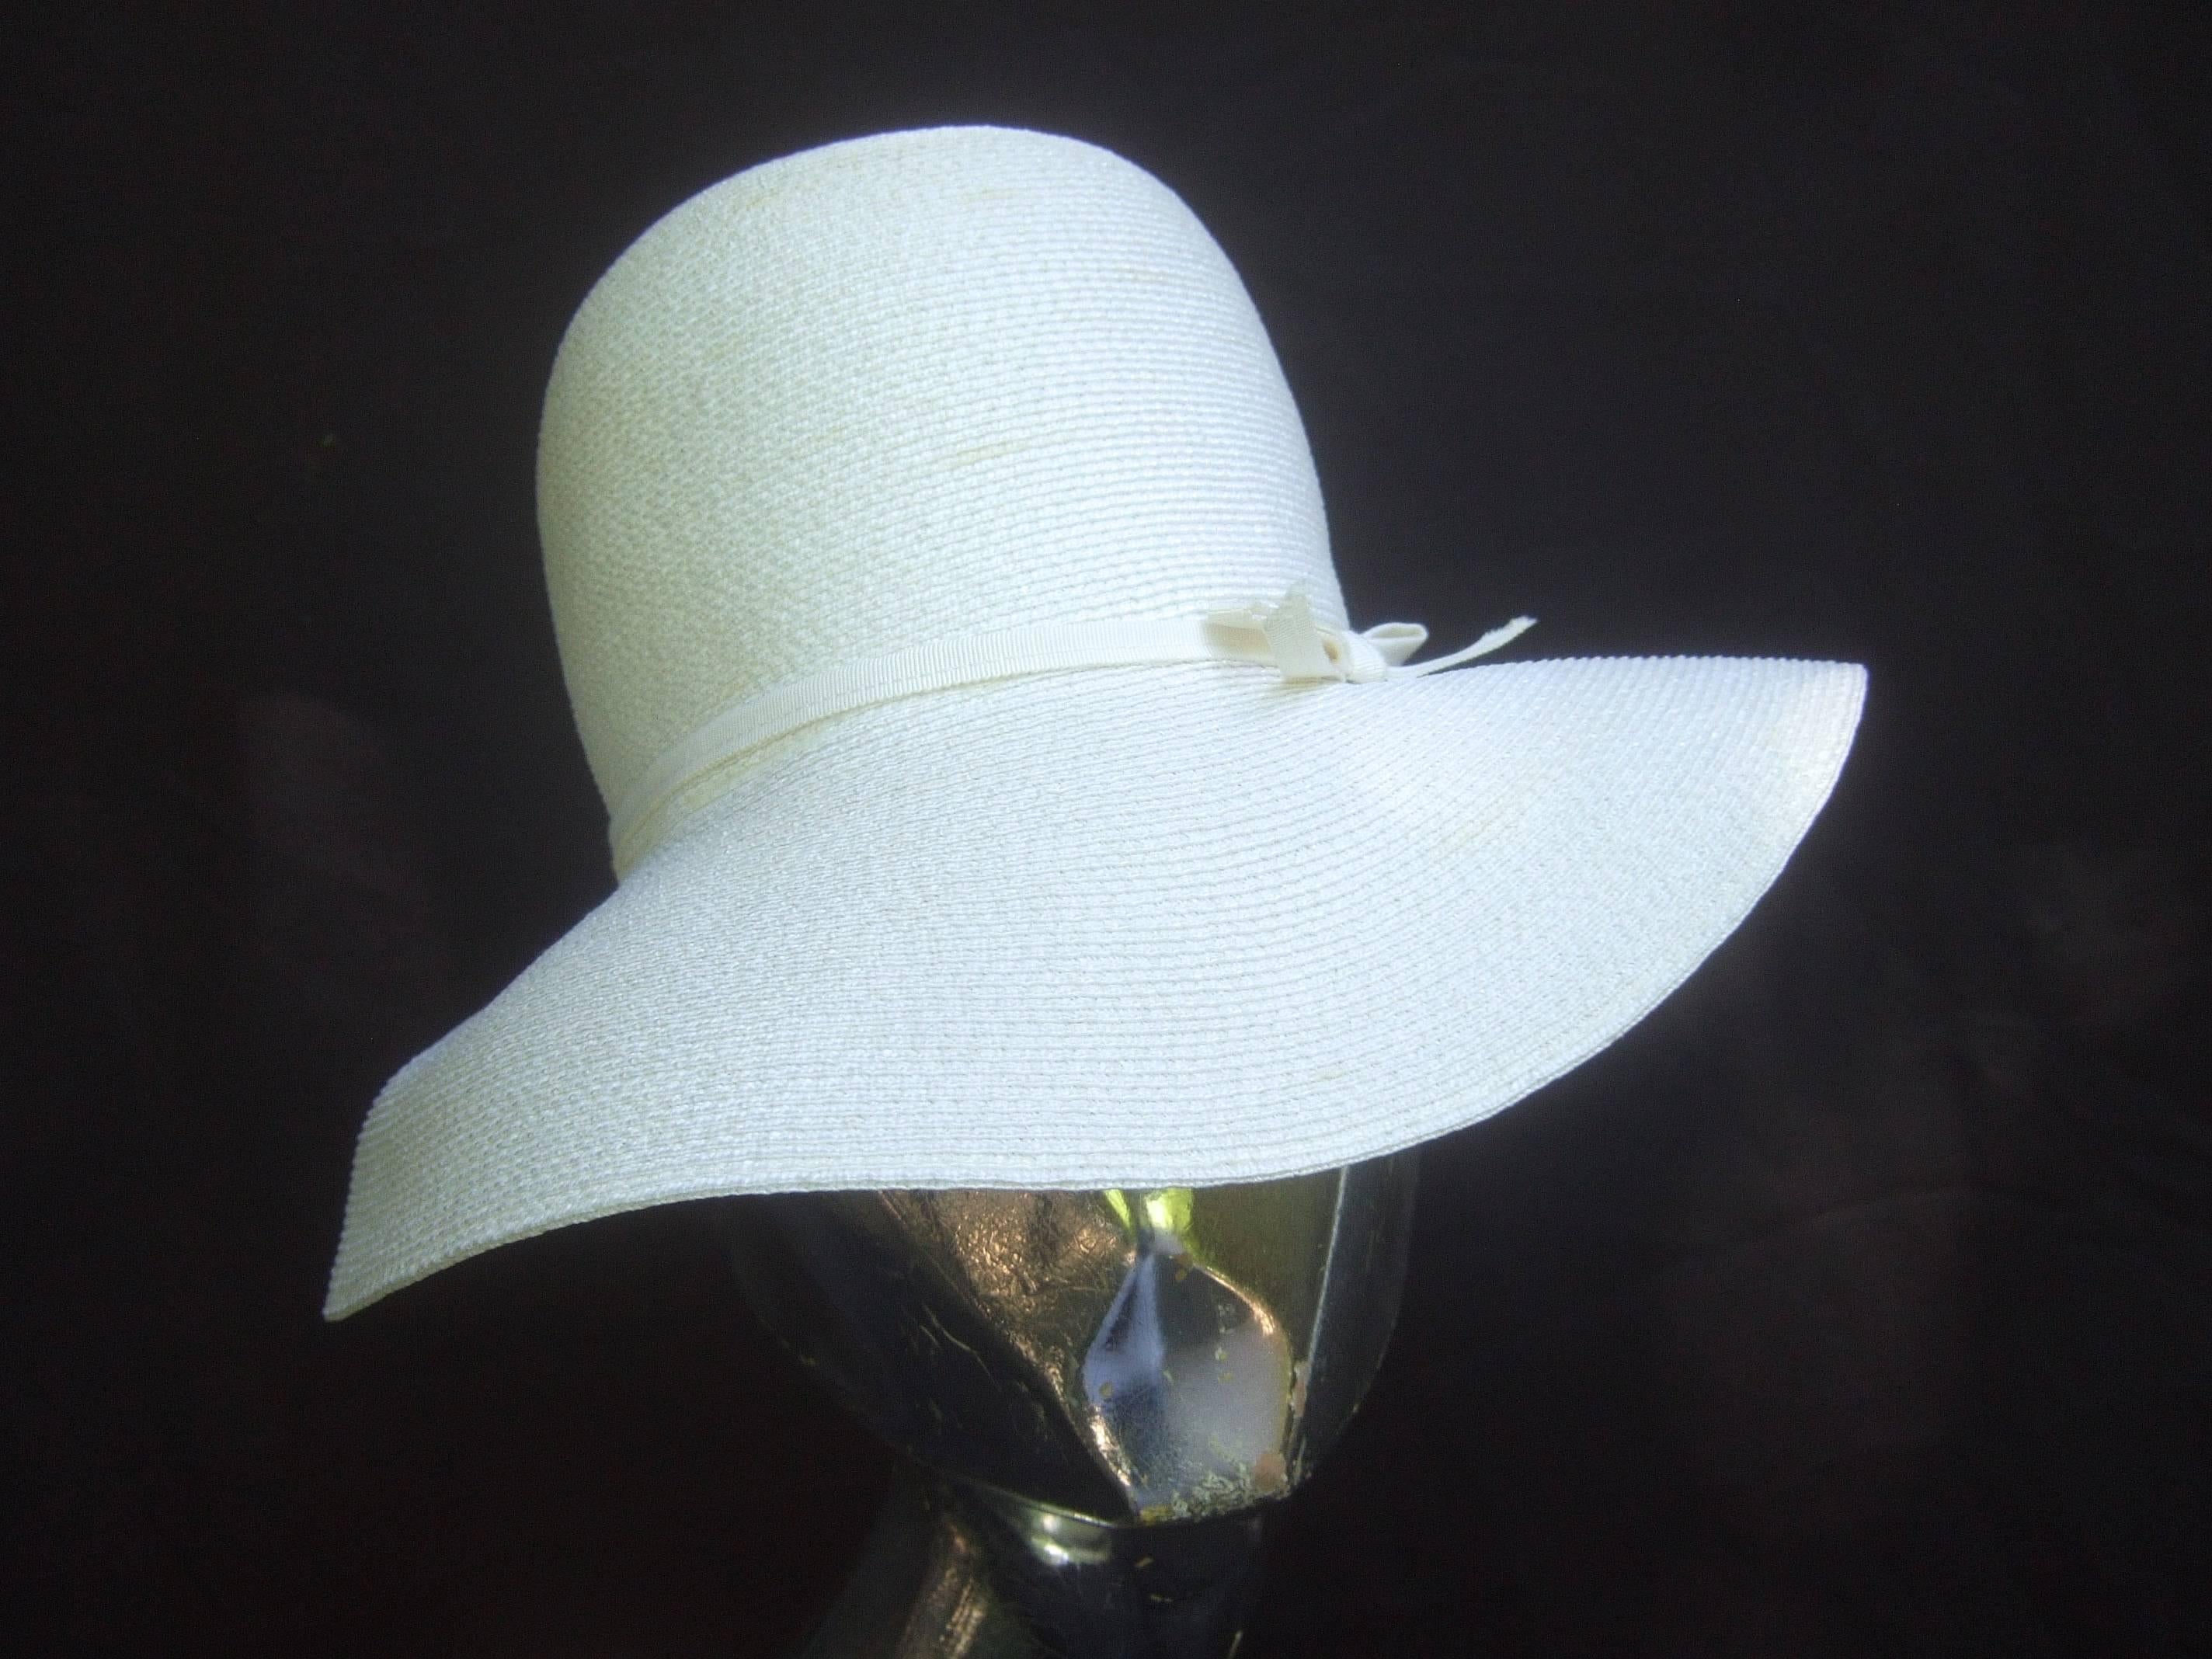 Saks Fifth Avenue Crisp white raffia summer hat c 1970
The stylish retro hat is designed with a delicate 
thin white grosgrain ribbon tied in a crisp bow 

Makes a very chic summer or resort wear accessory 
Perfect for weddings, garden parties